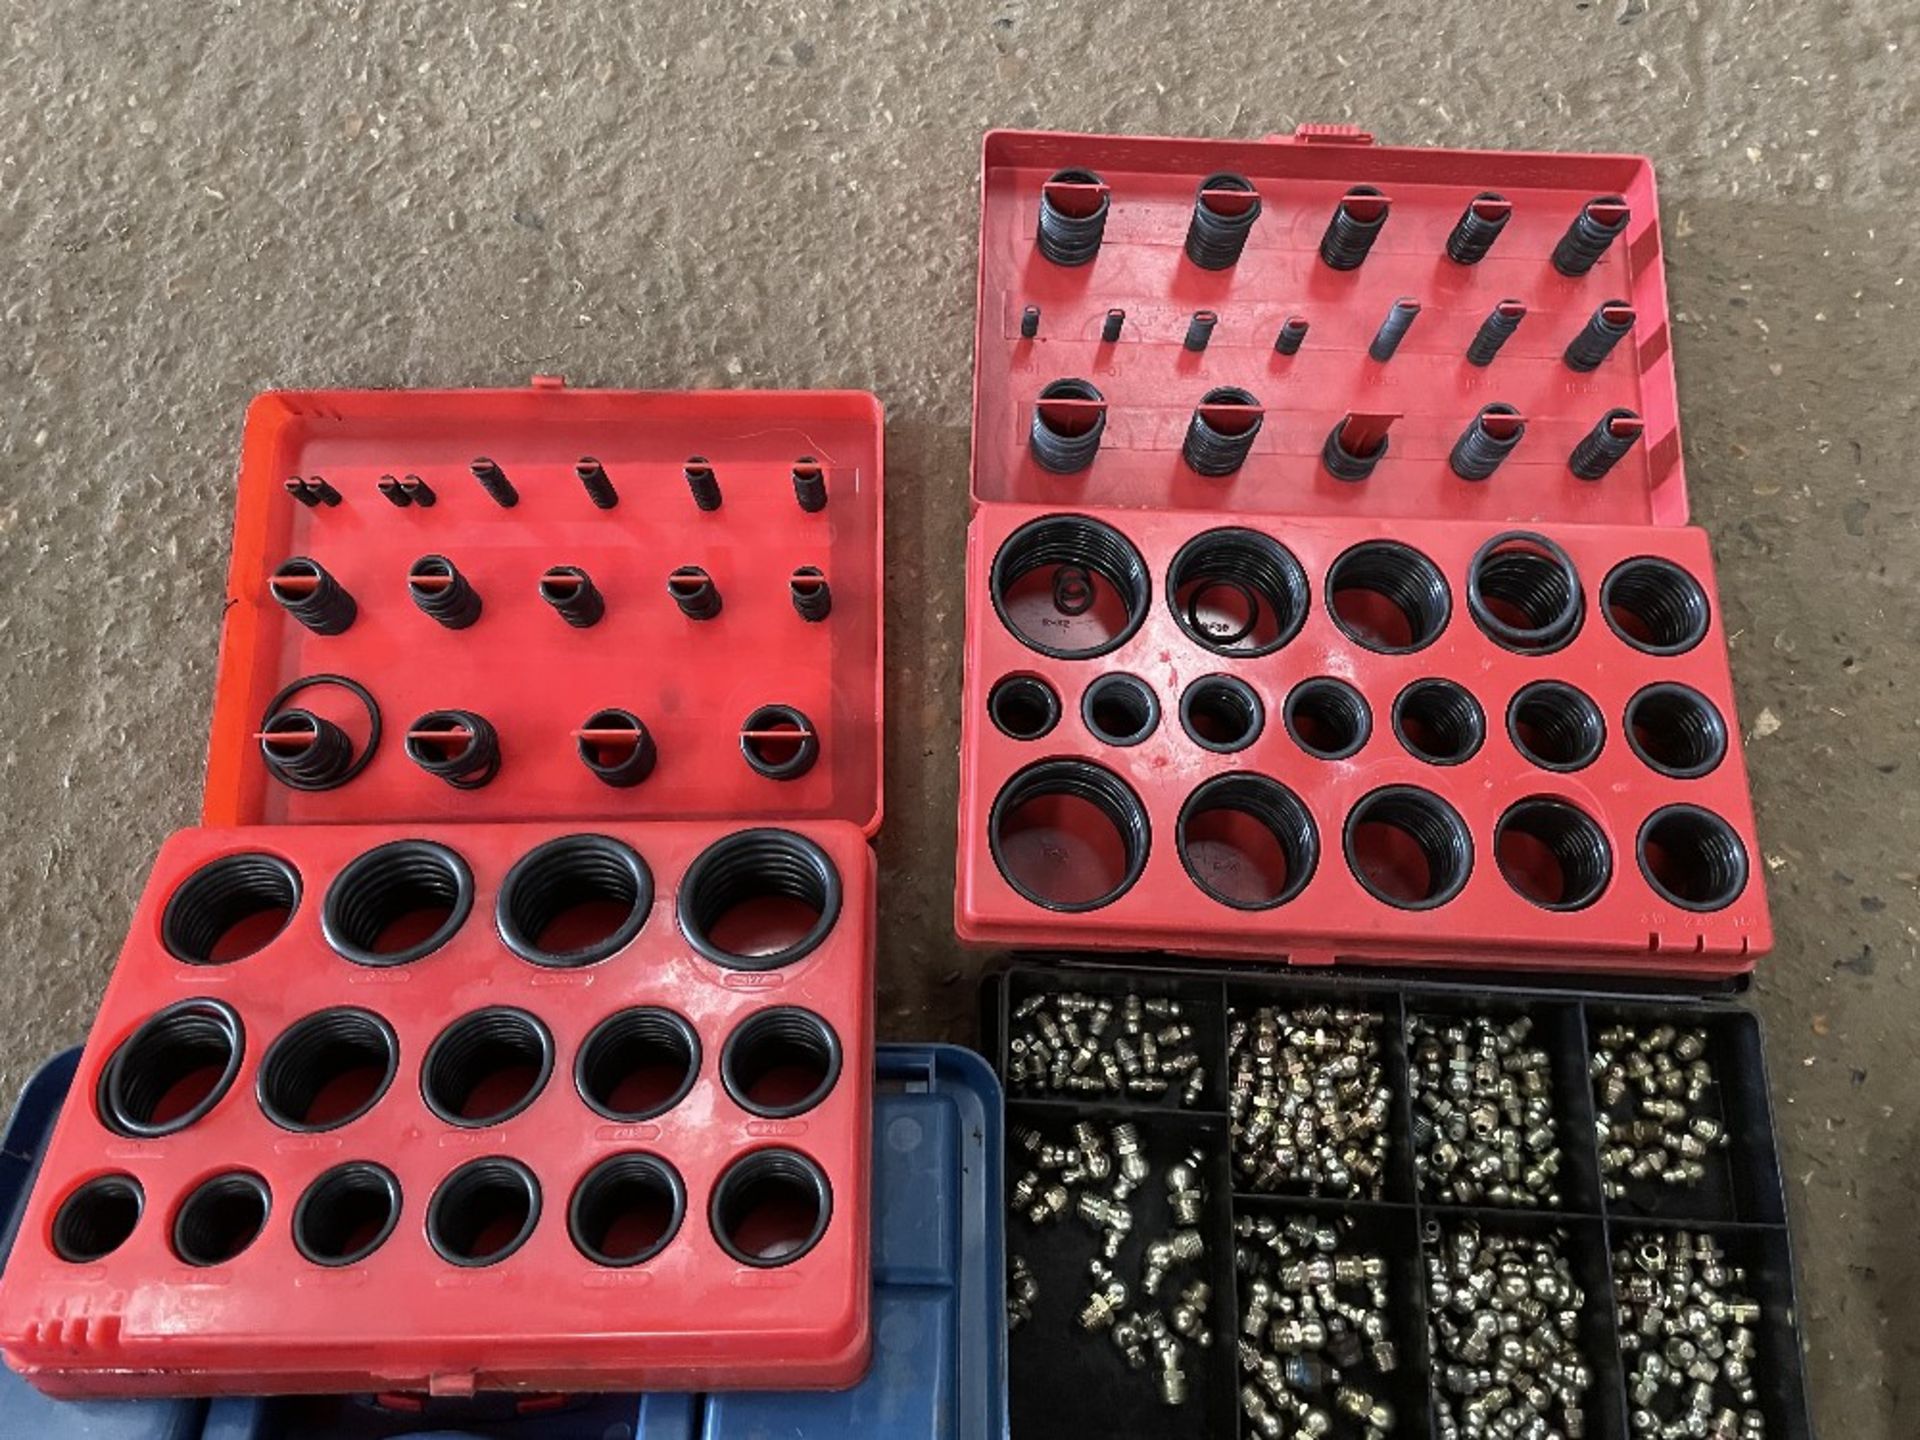 2 x Boxes of O Rings, Grease Nipples, Roll Pins, - Image 3 of 5